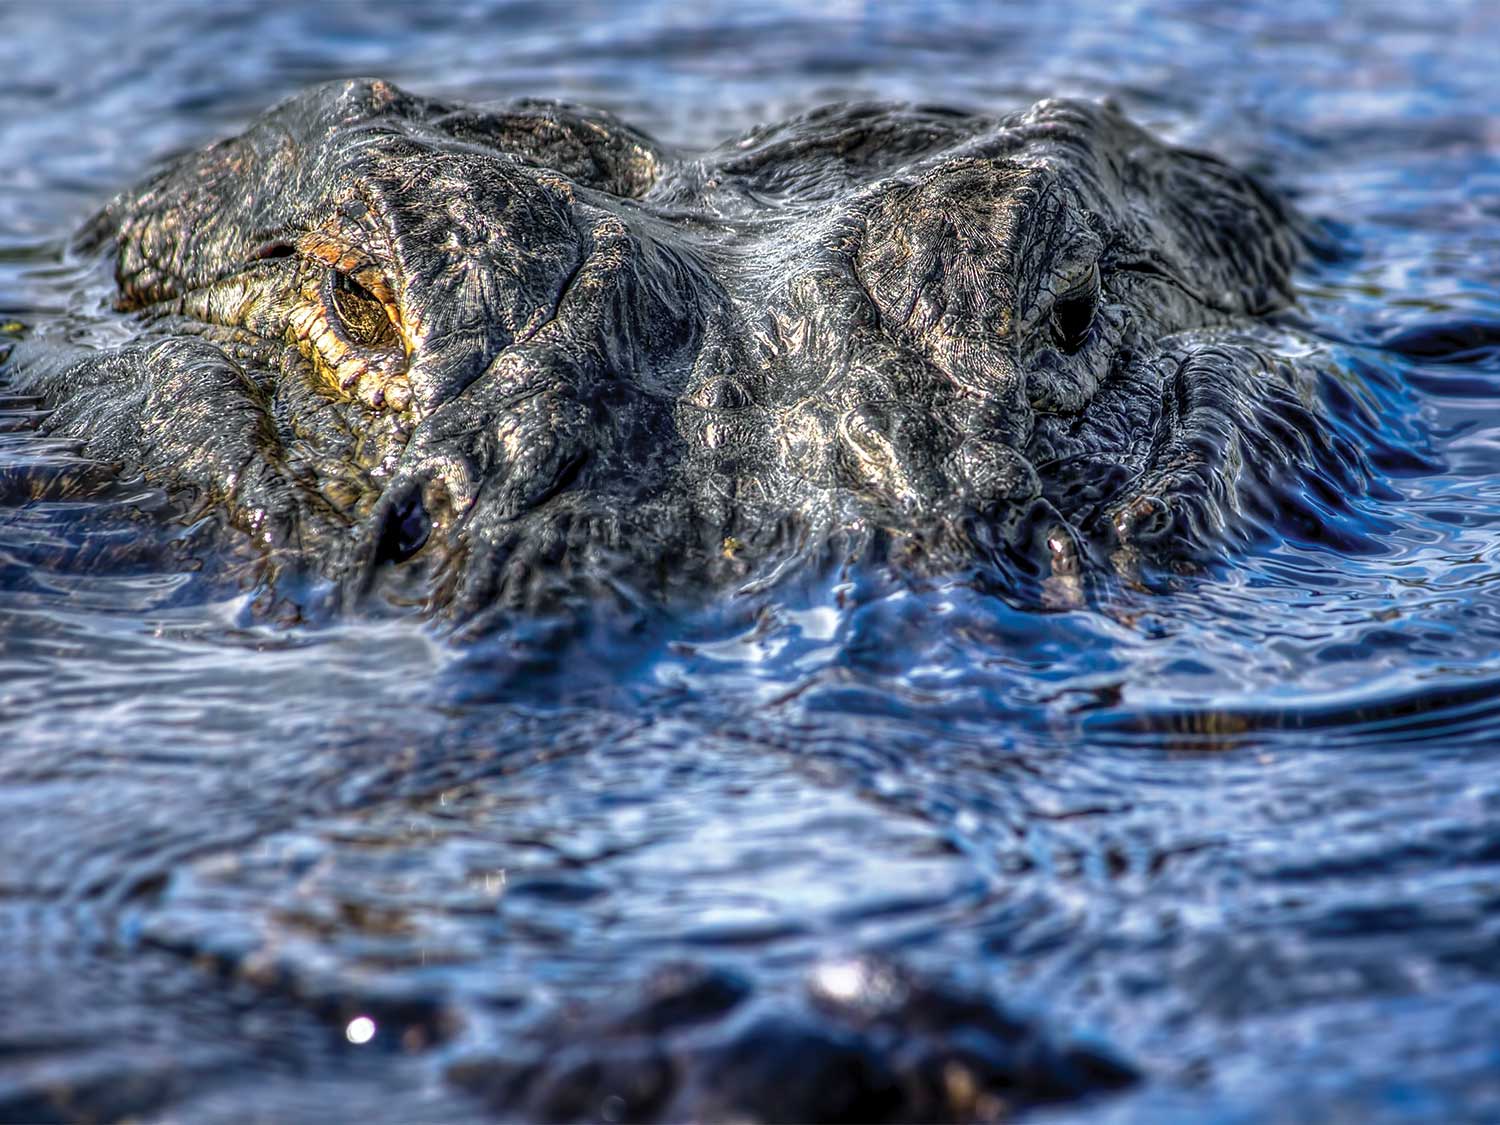 Close up detail of an alligator face breaking the surface of the water.